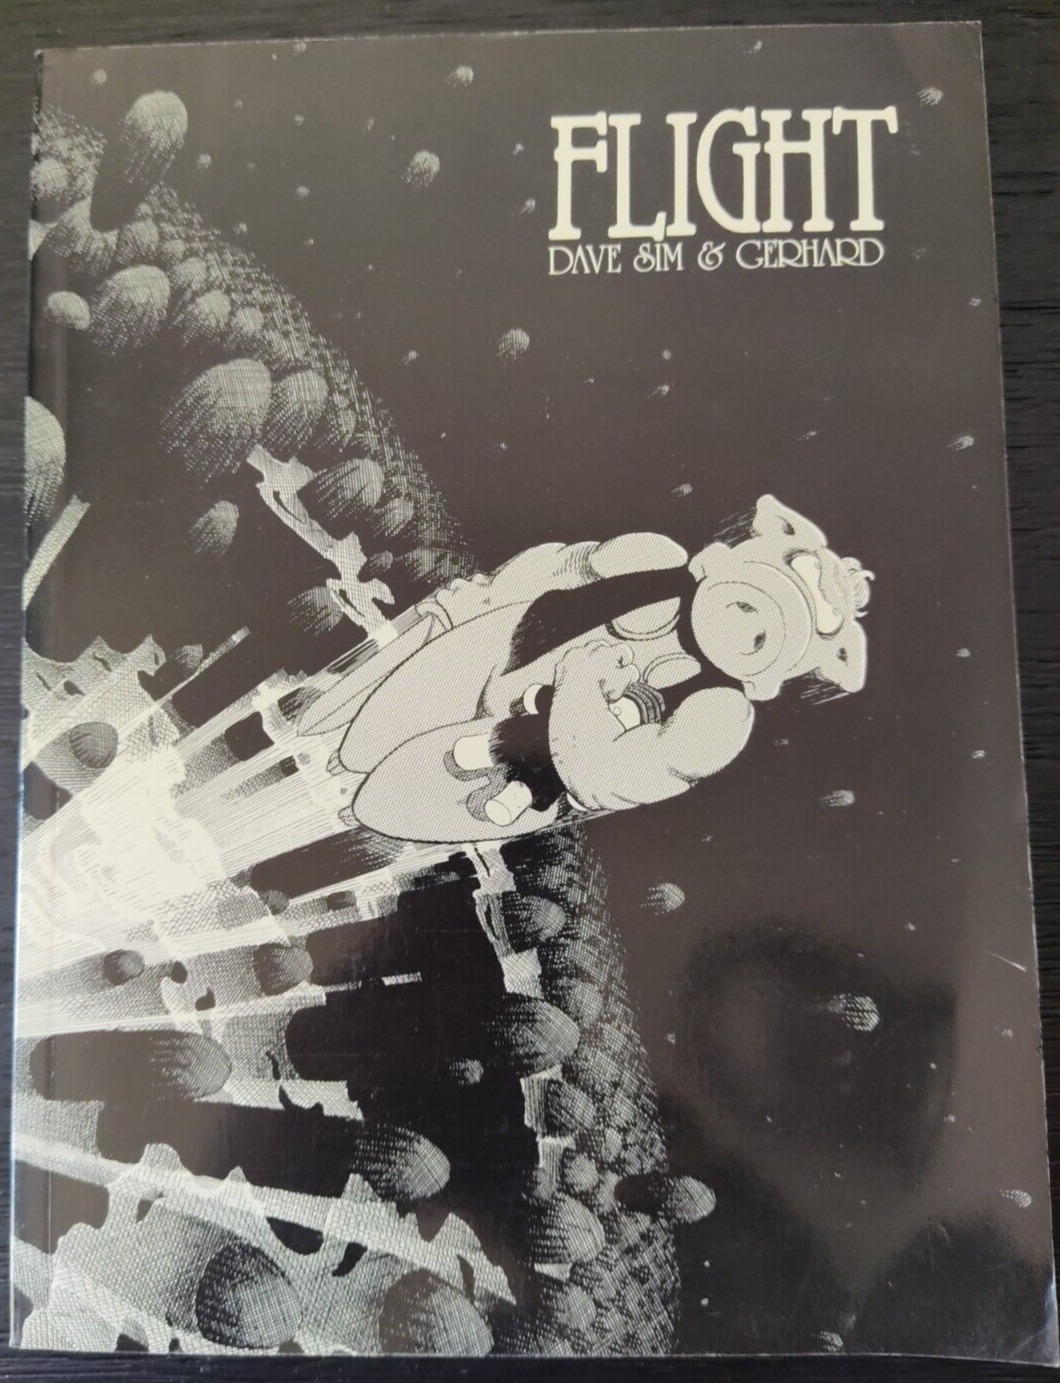 Flight by Dave Sim Cerebus #7 Issues 151-162 SC TPB 1993 2nd Printing